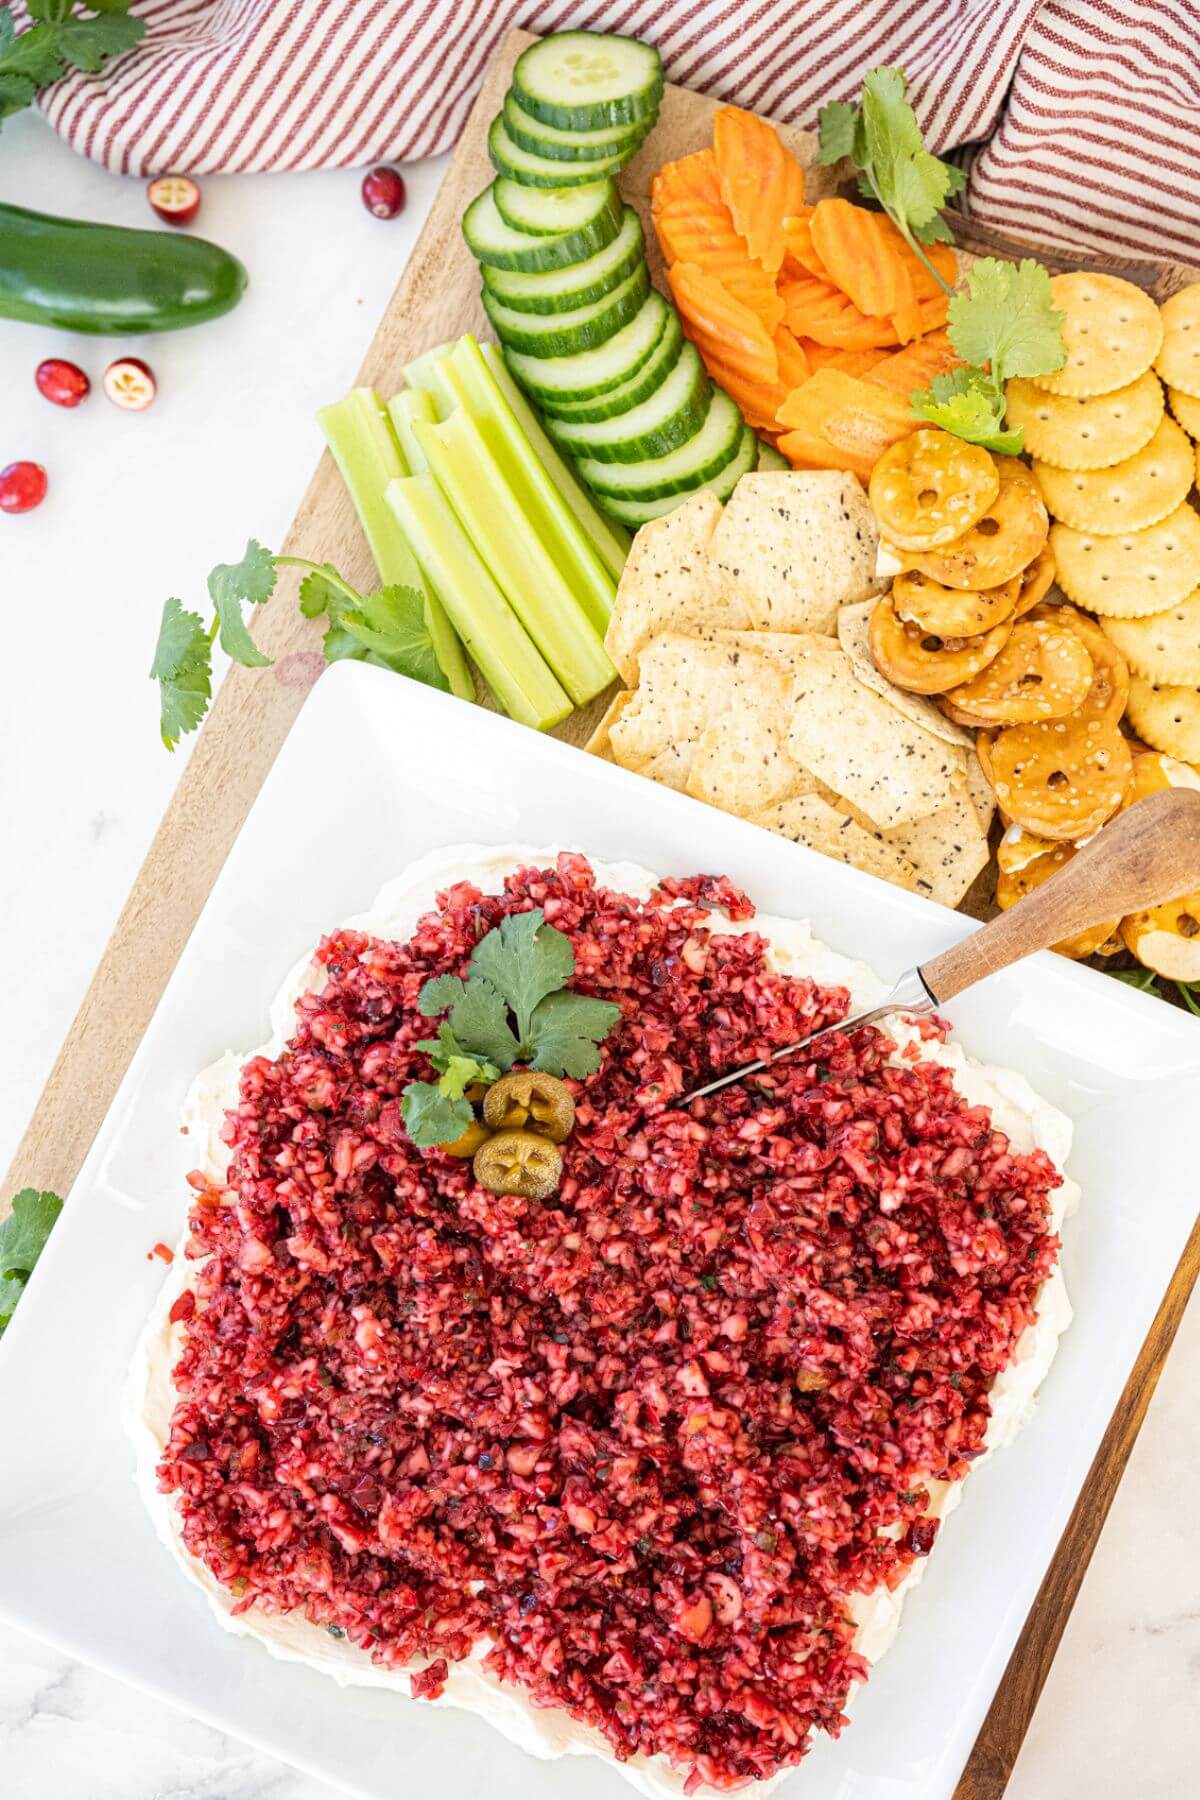 Square serving plate holds cranberry dip by vegetables and crackers.